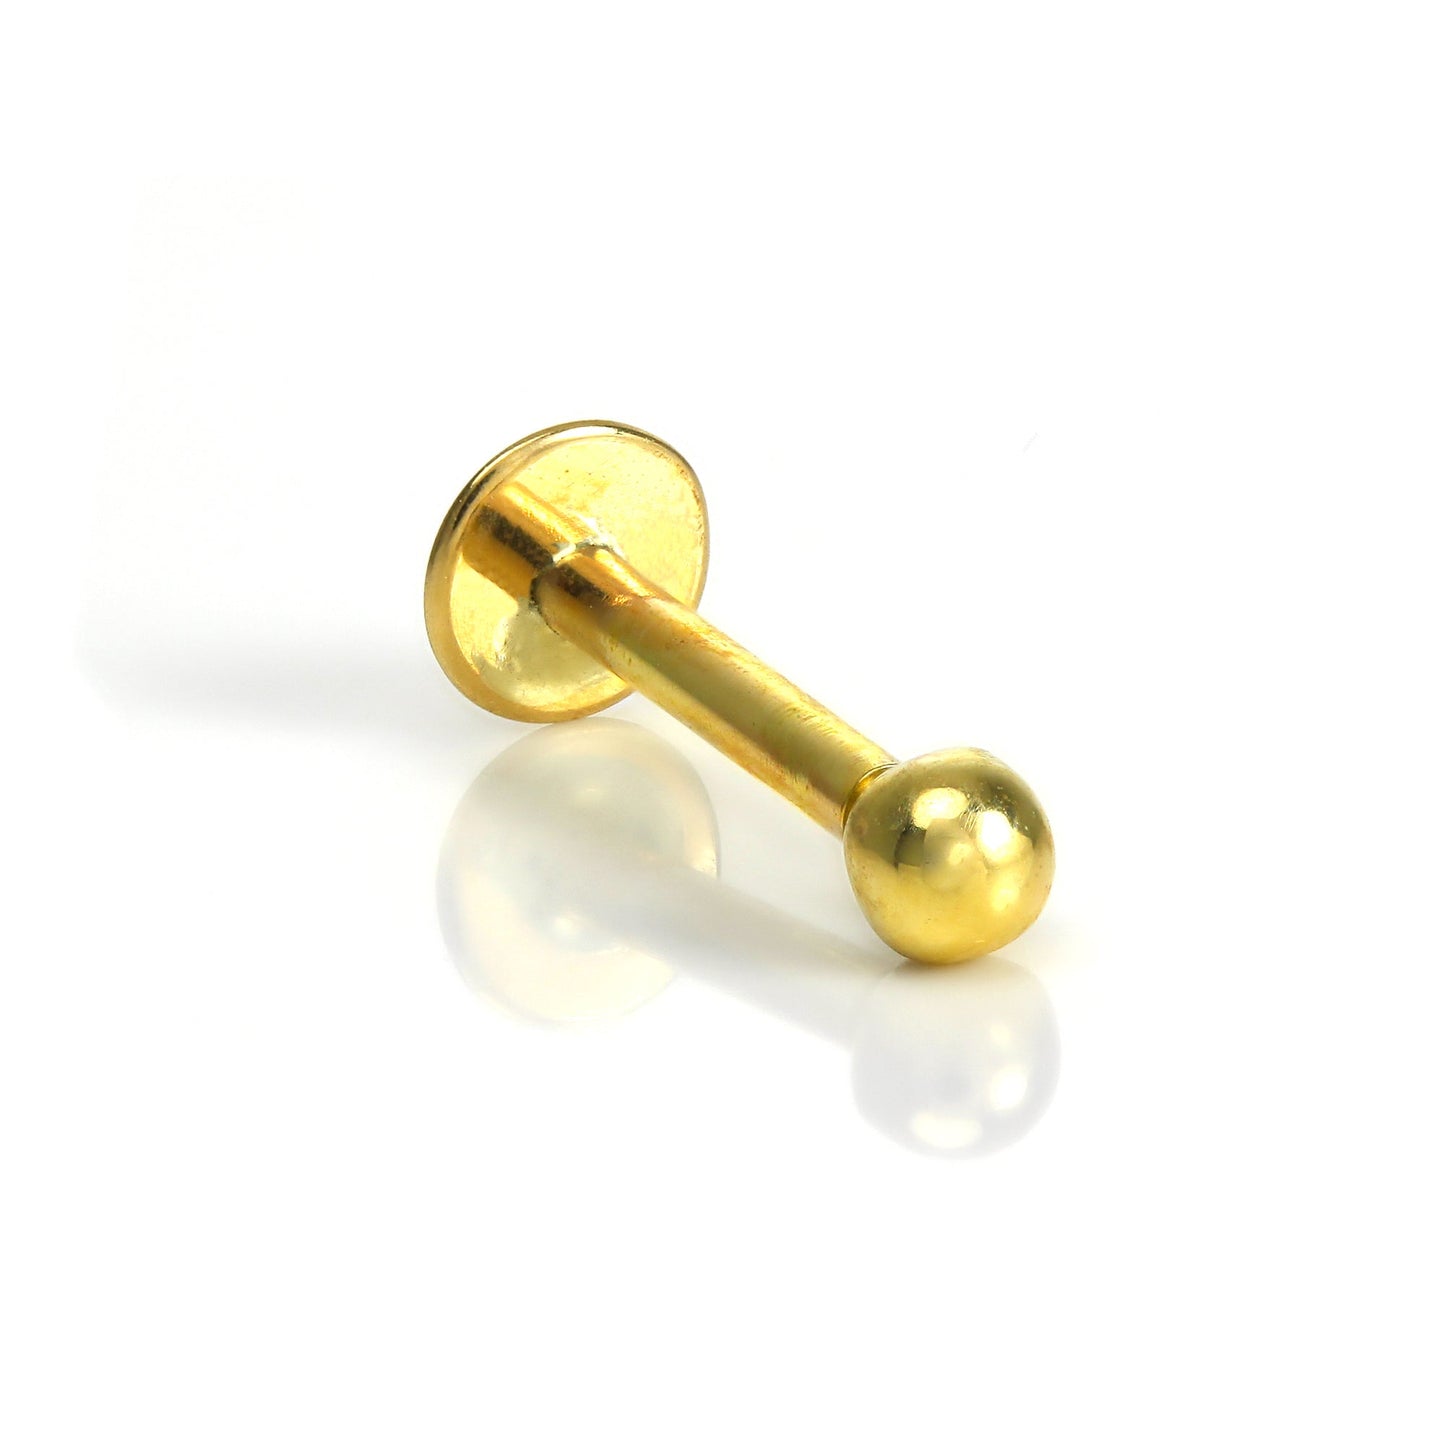 Solid 9ct Gold 2.5mm Ball End Labret Helix Piercing